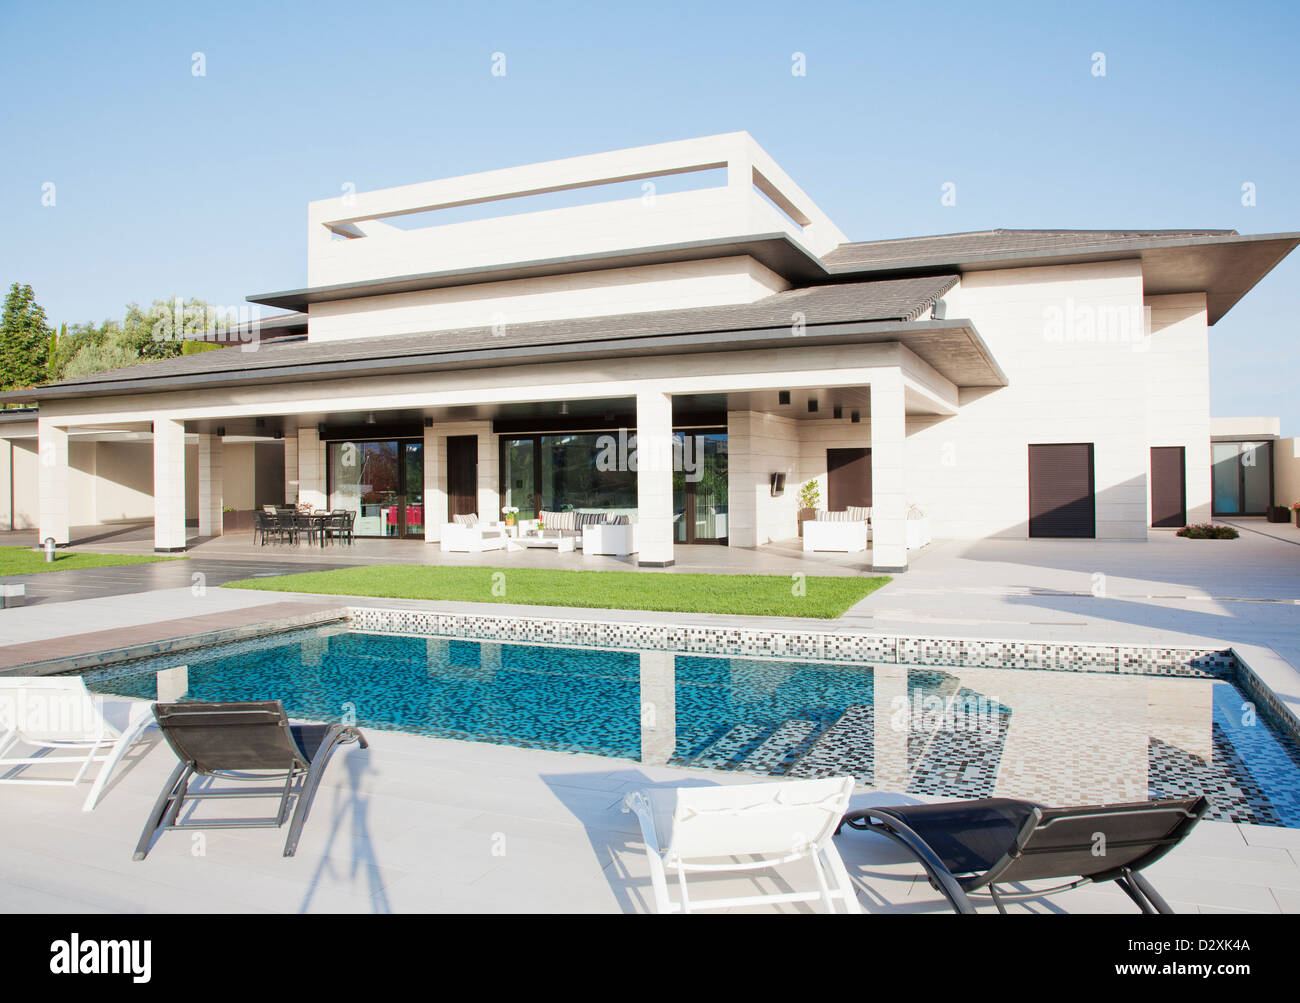 Luxury swimming pool and house Stock Photo